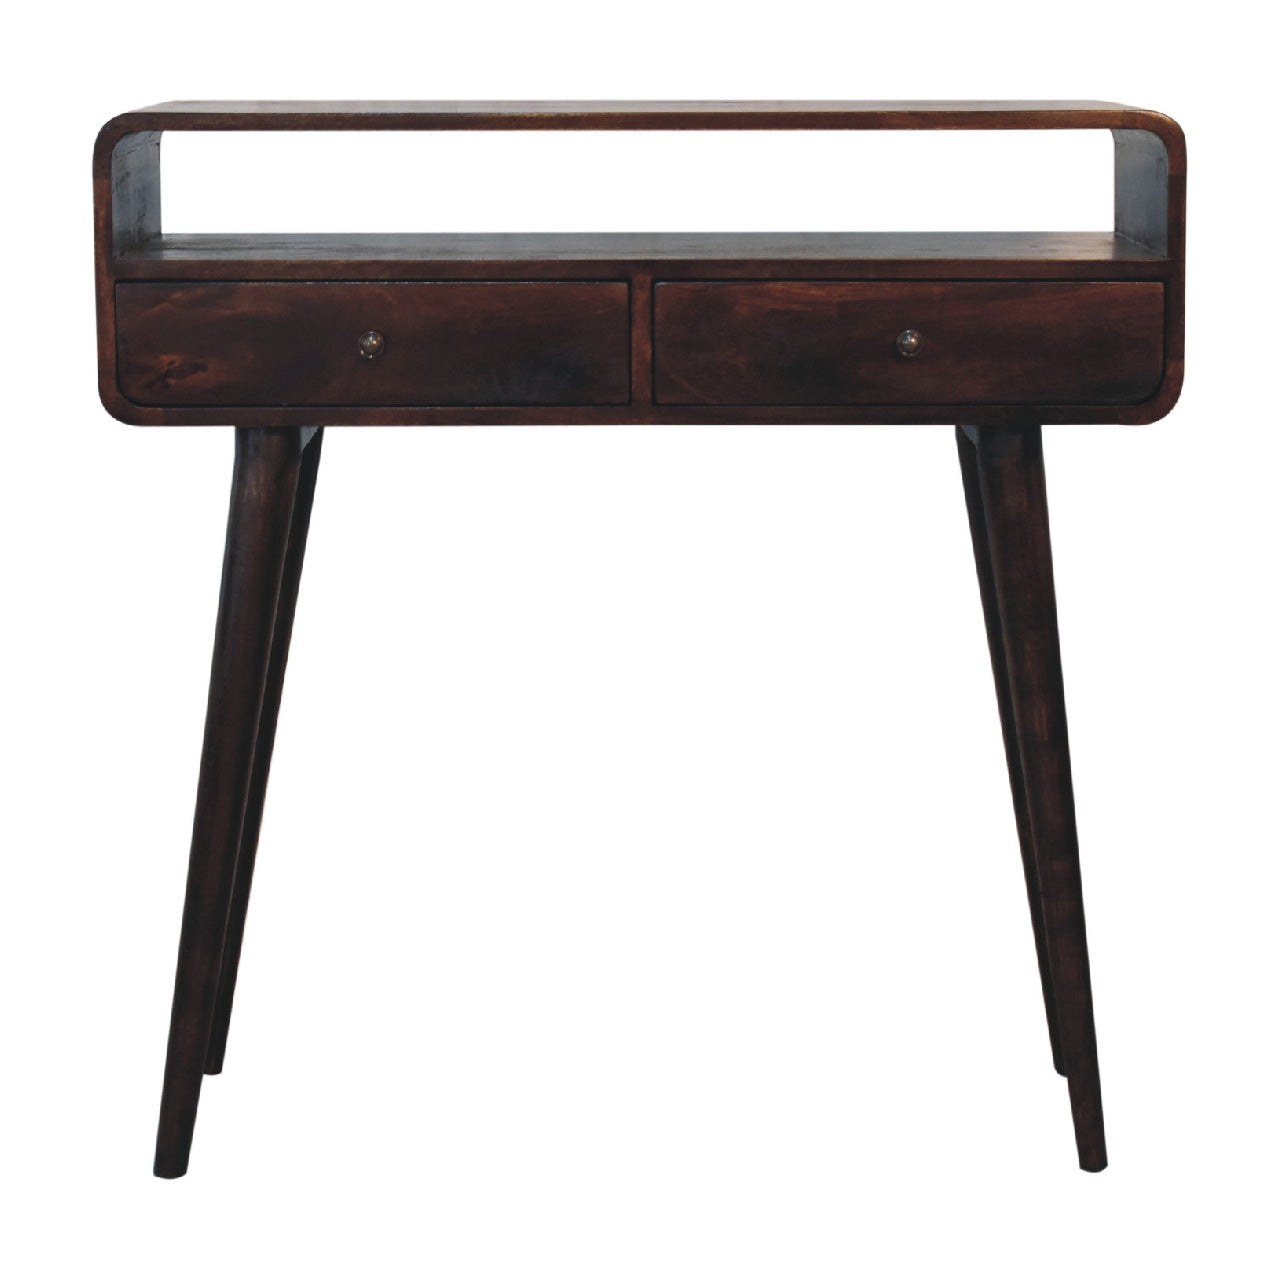 View Curved Light Walnut Console Table information